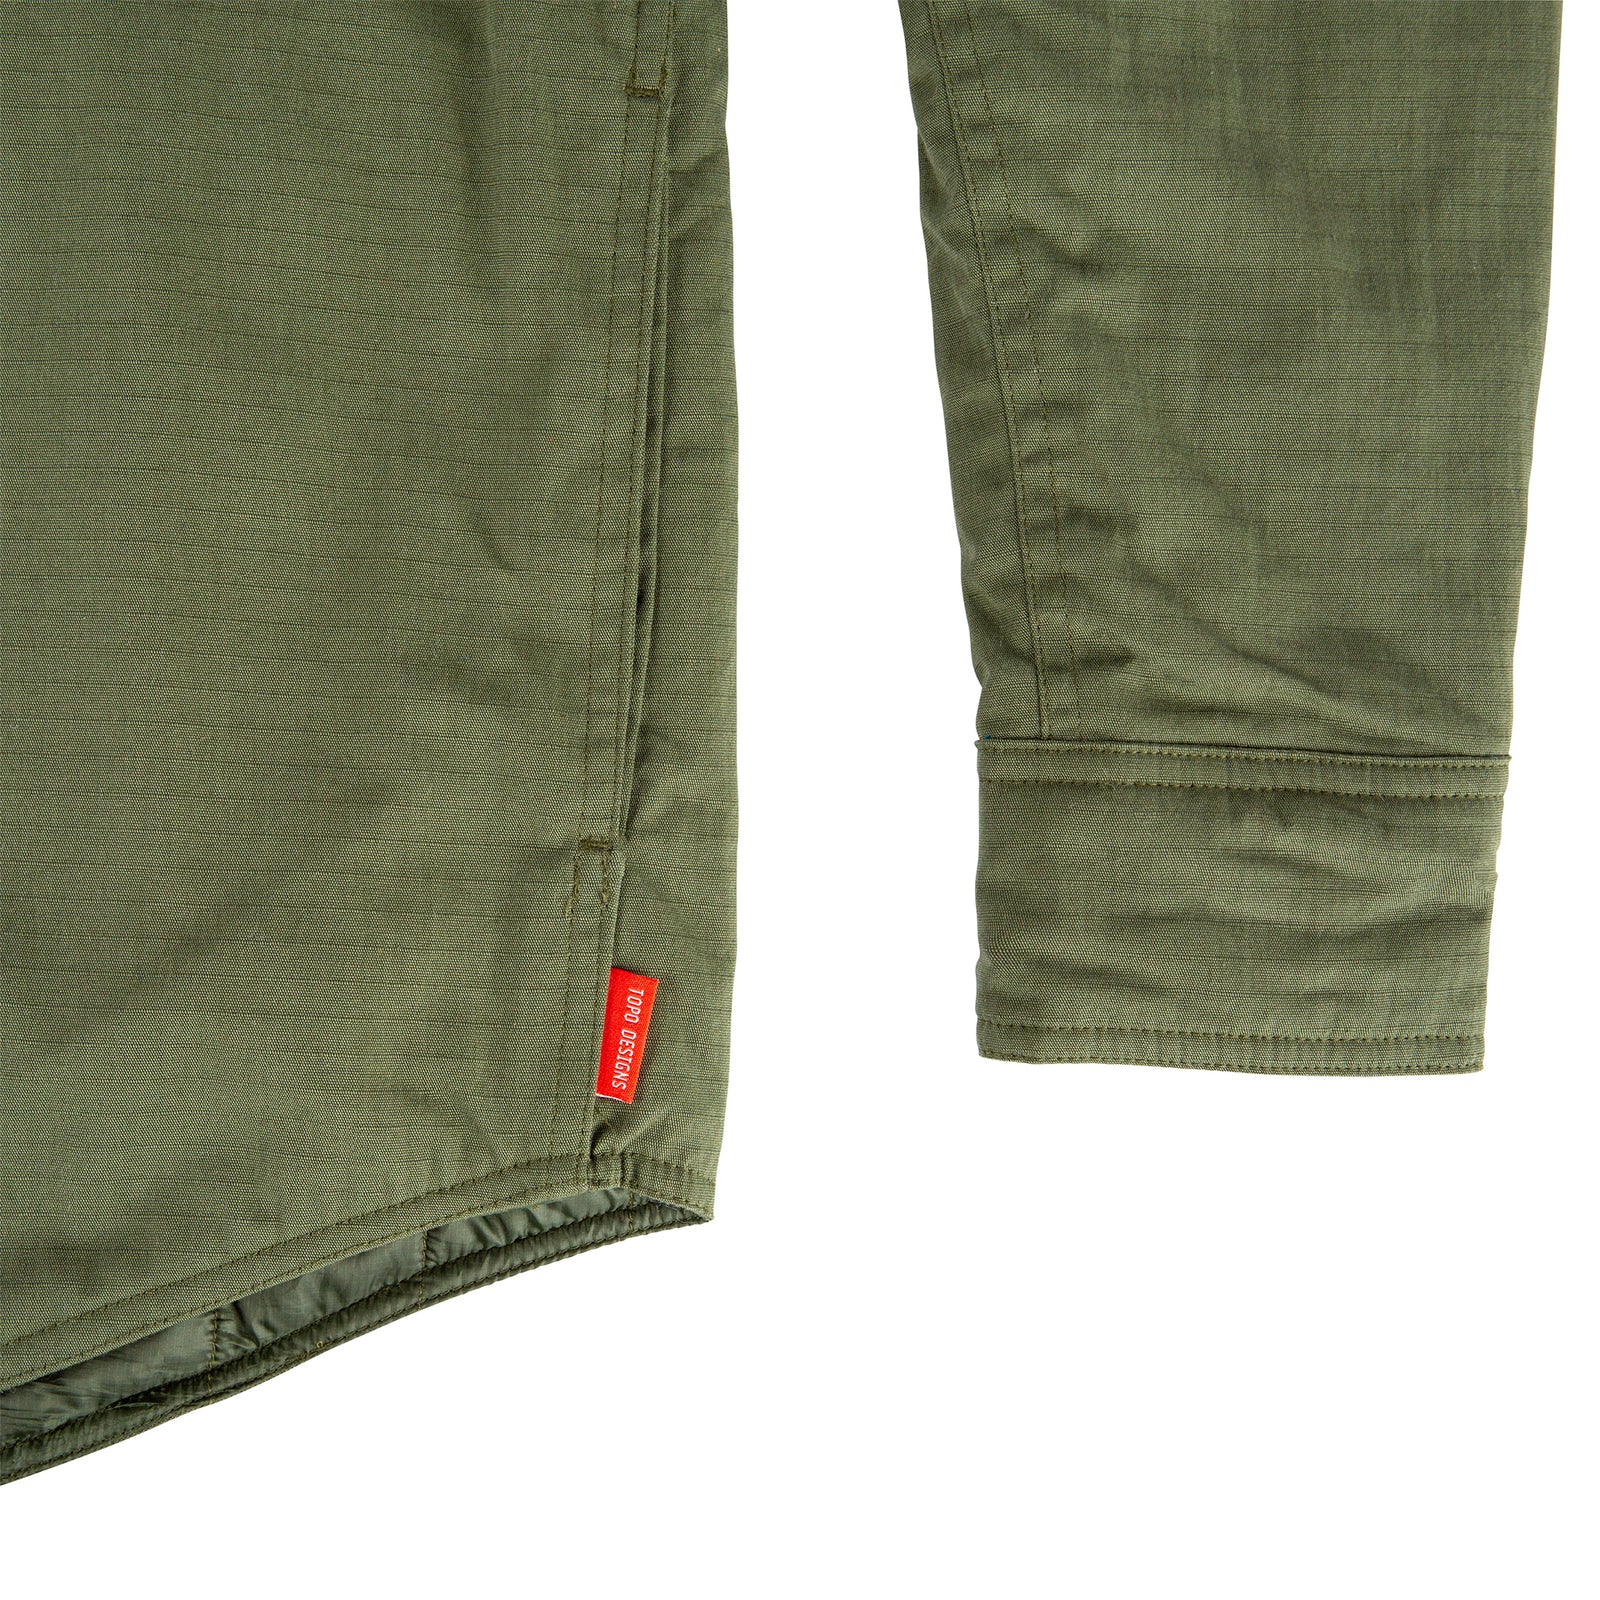 General detail shot of Men's Topo Designs Insulated Shirt Jacket in Olive green showing sleeve cuff.